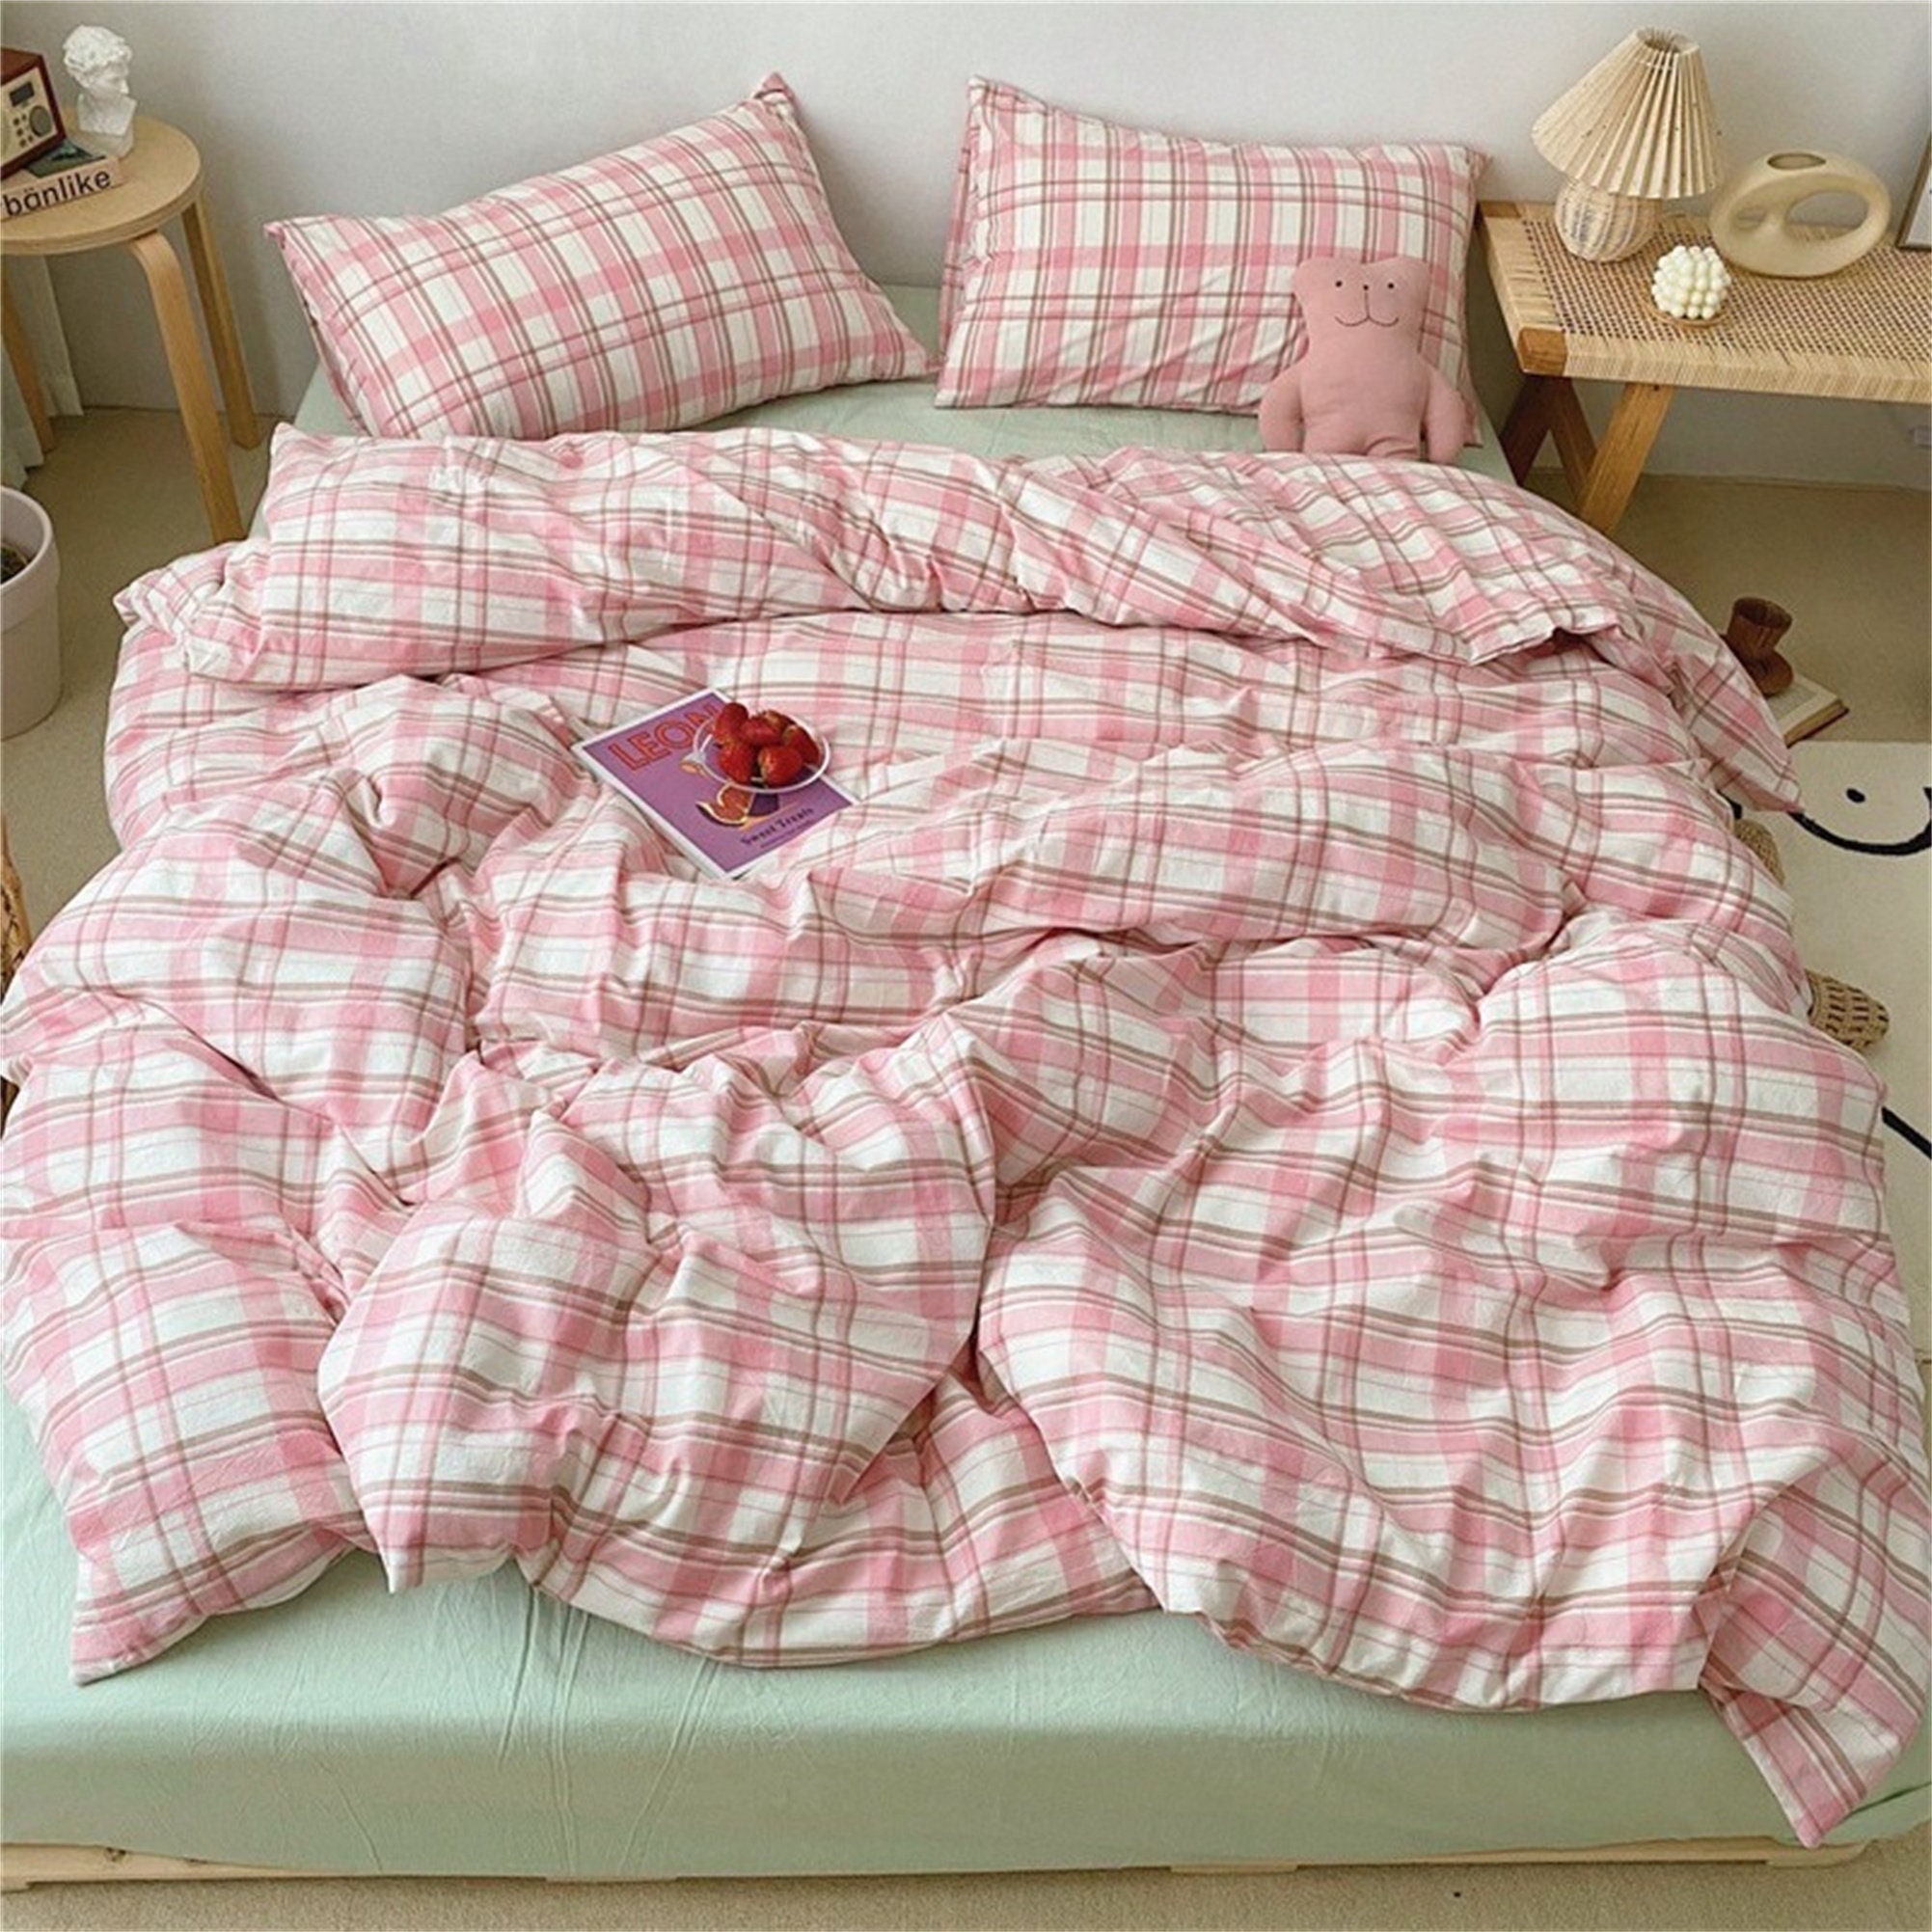 Soft Duvet Cover Sets Washed Cotton Bedding Set Pillowcase Twin/Queen/King Size 